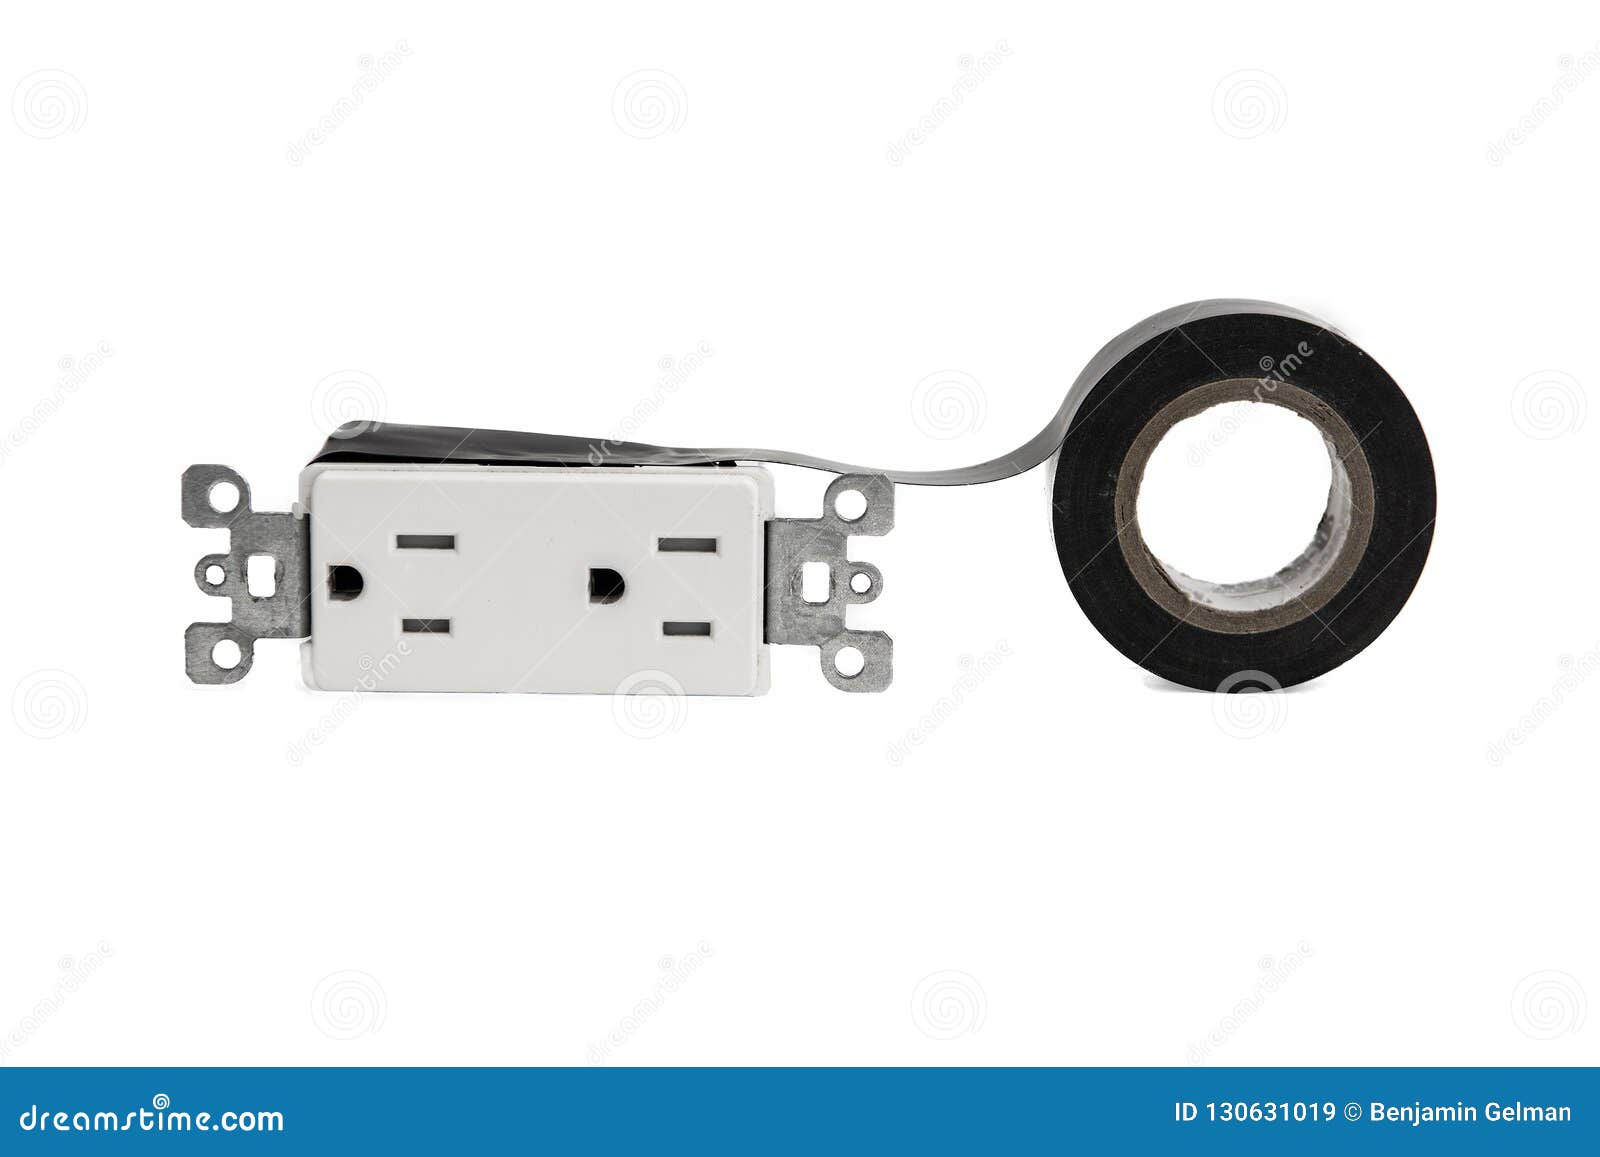 Insulating Tape With Bare Screws Of An Electrical Outlet Stock Image